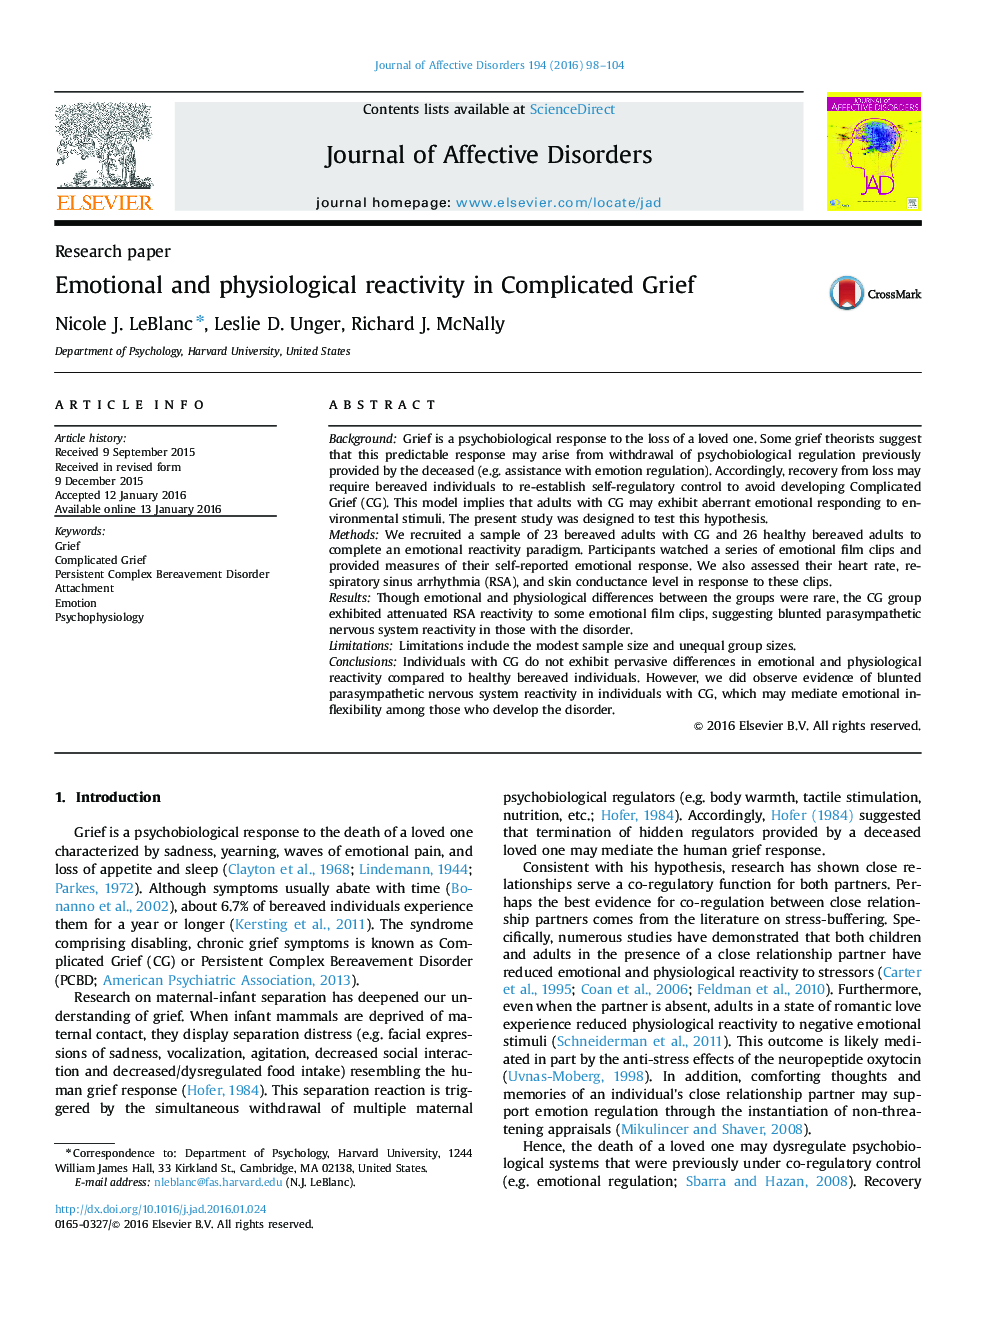 Emotional and physiological reactivity in Complicated Grief